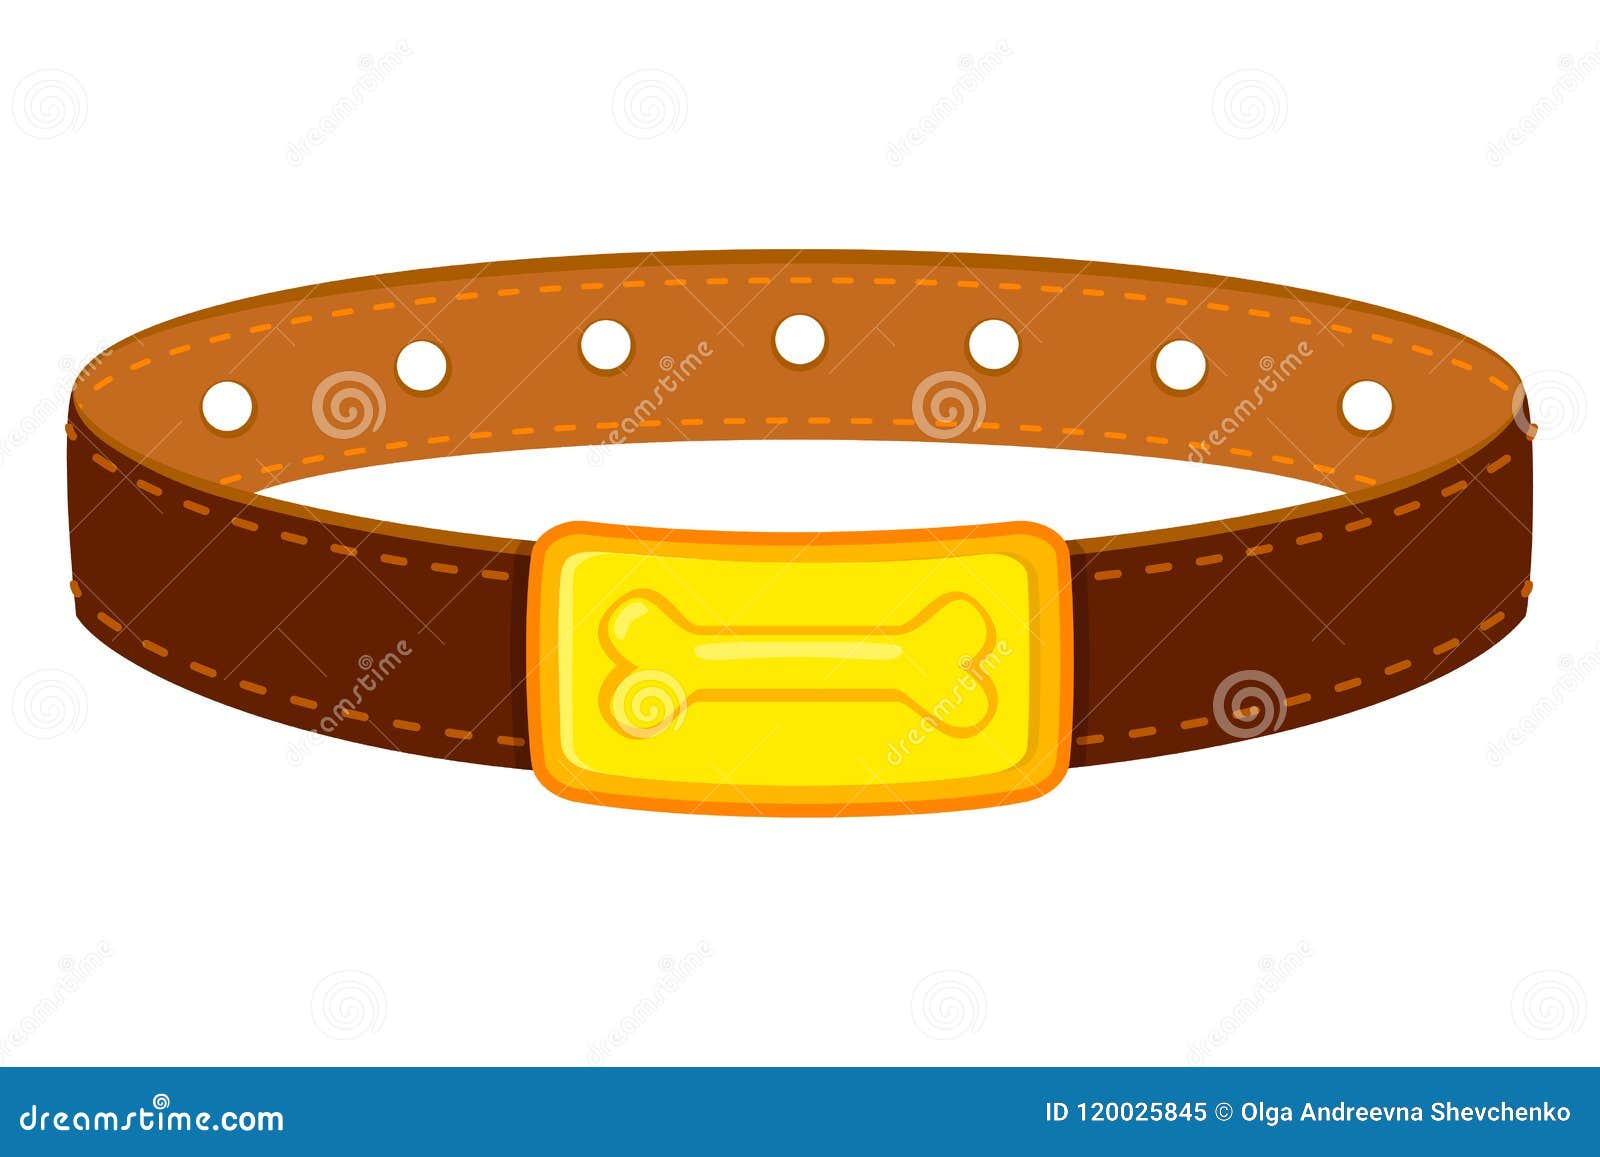 Colorful Cartoon Dog Collar Stock Vector - Illustration of colorful ...